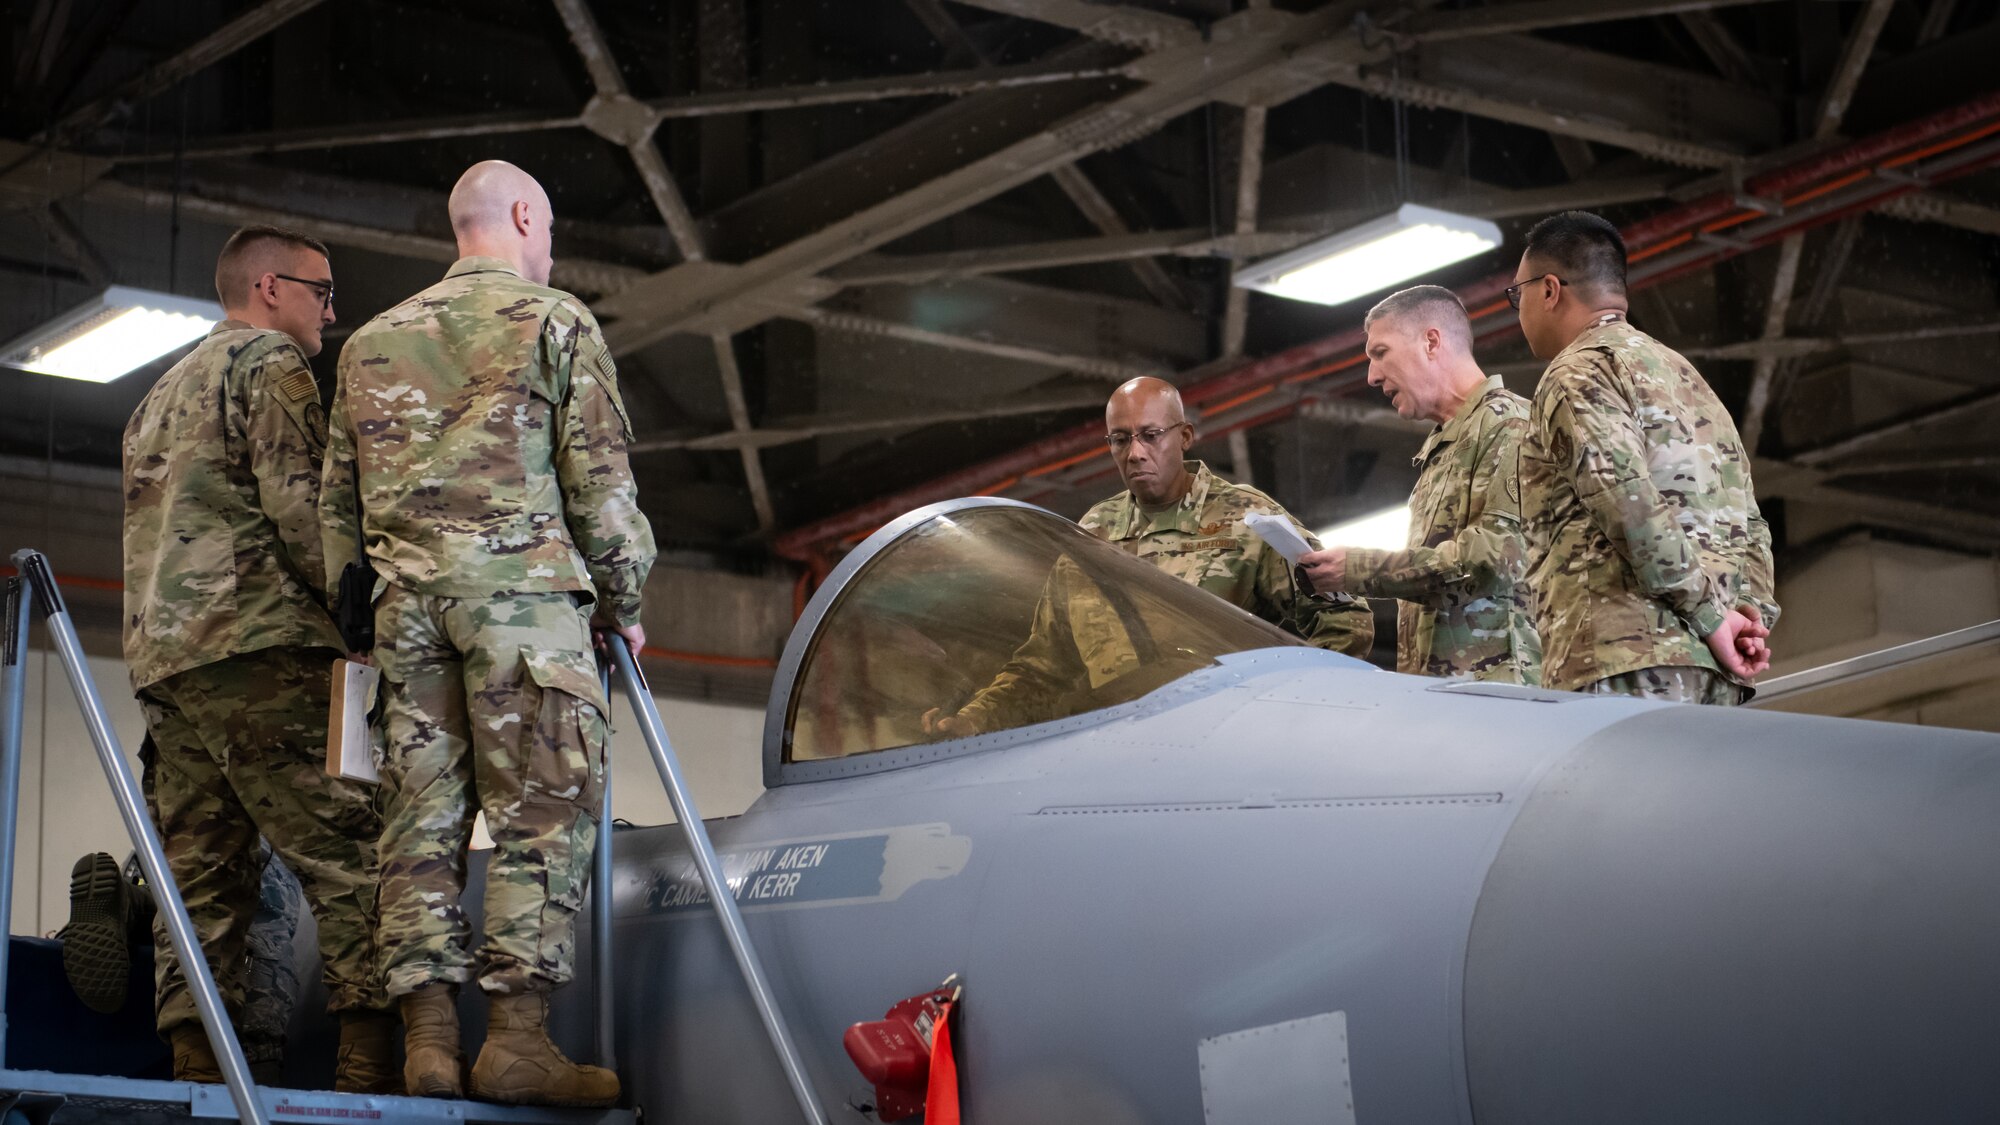 U.S. Air Force Gen. CQ Brown, Jr., Pacific Air Forces commander, inspects an F-15C Eagle during a tour at Kadena Air Base, Japan, Nov. 12, 2019. During the tour, Brown visited various base squadrons and agencies to learn about unit-specific issues, their operations, and answer questions. (U.S. Air Force photo by Staff Sgt. Benjamin Raughton)